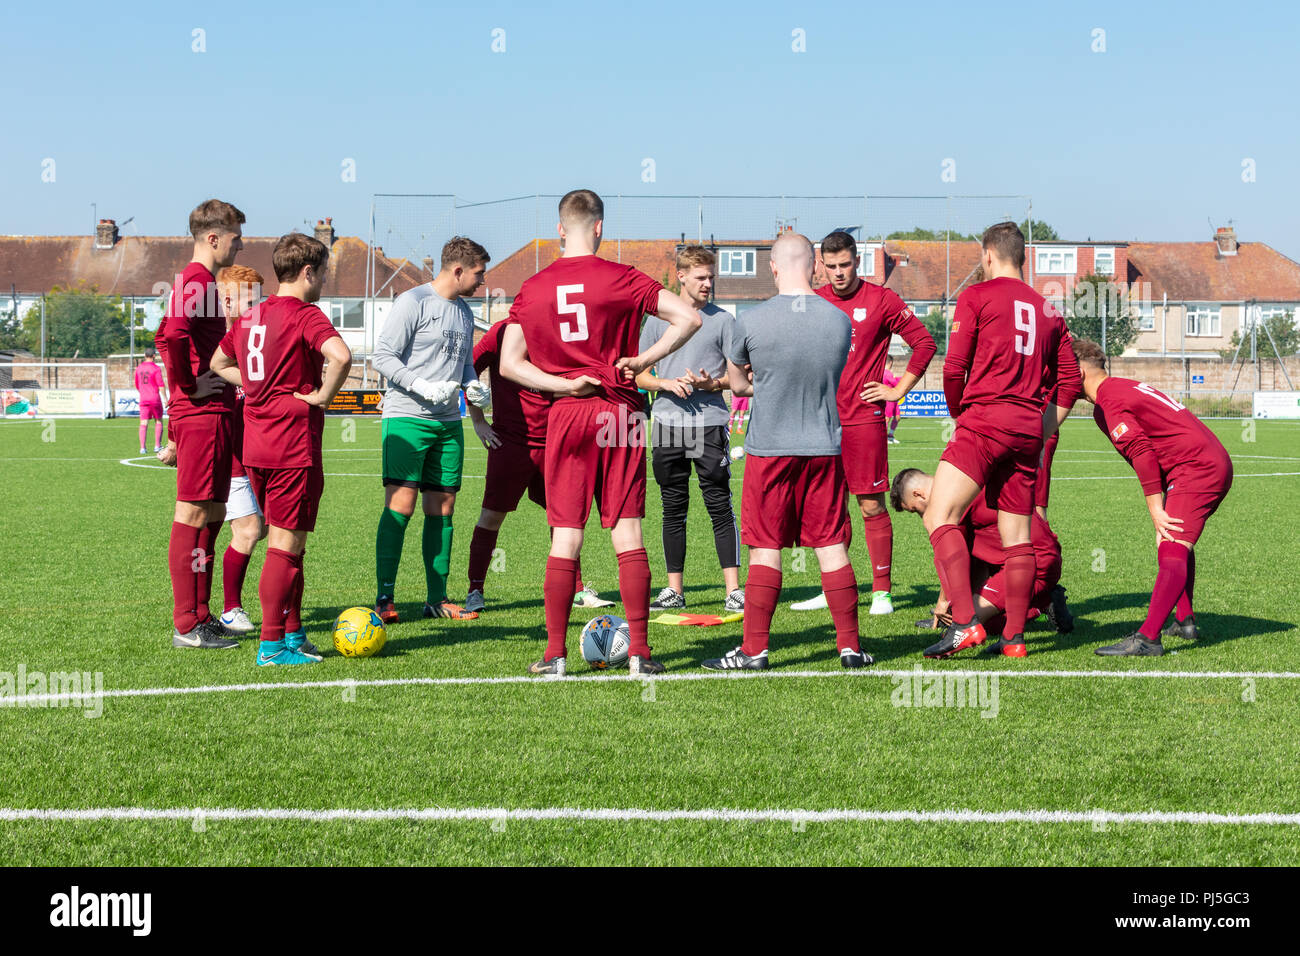 Lancing, England; 2nd September 2018; Manager gives Team Talk to Group of Male Football Players Prior to a Match Stock Photo